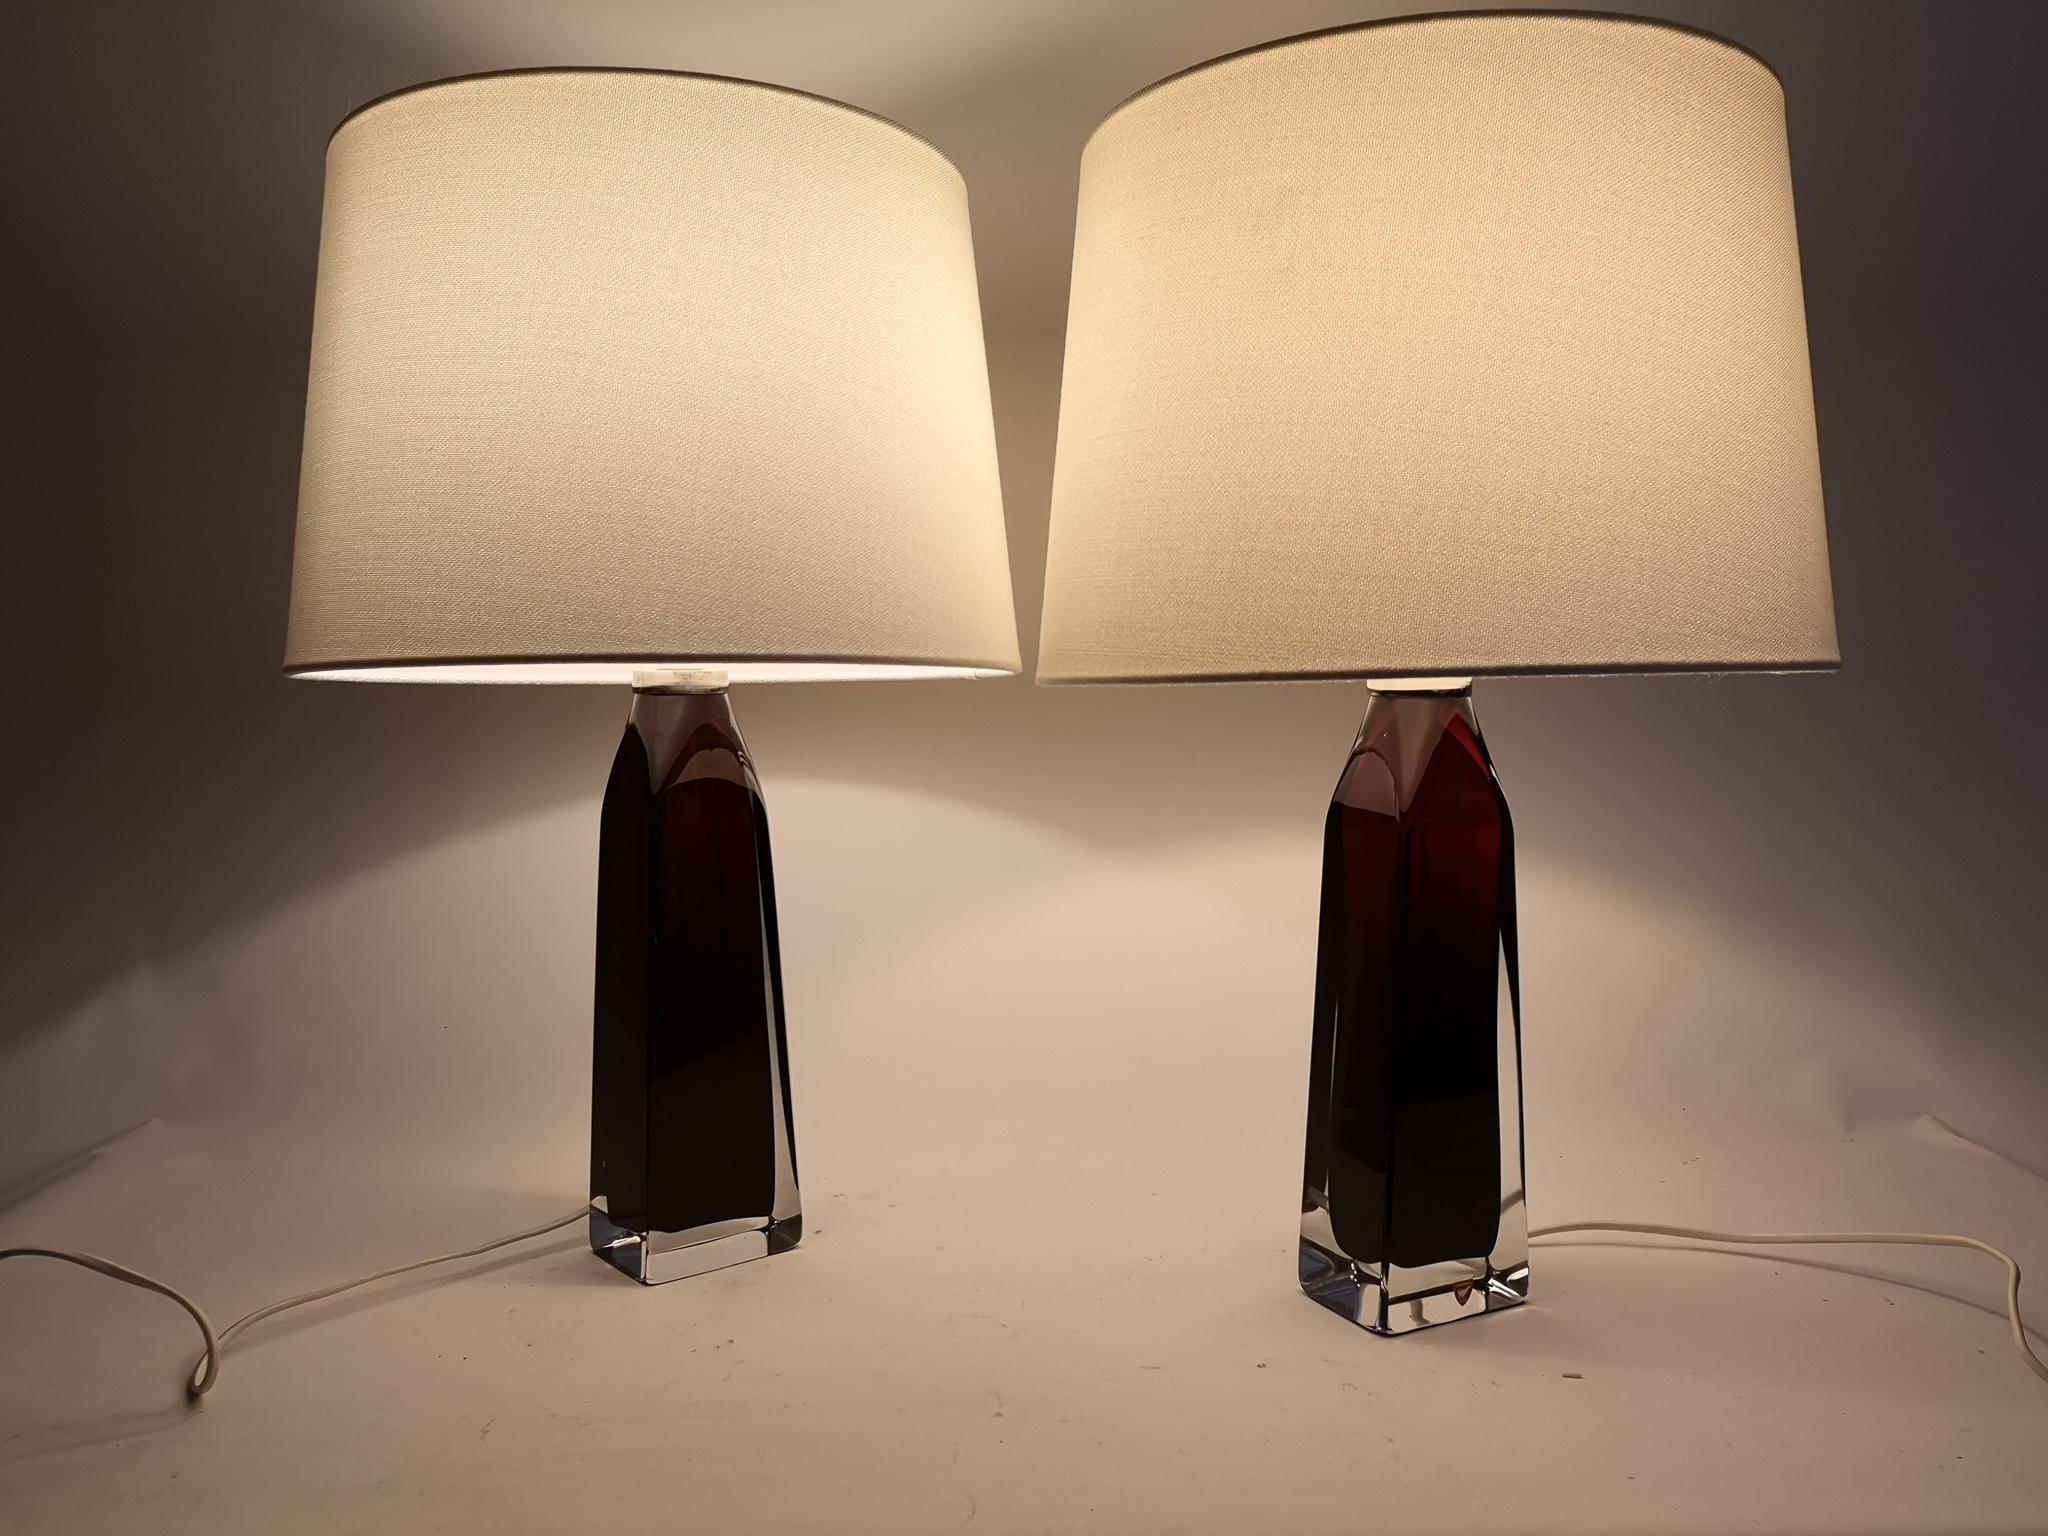 Table lamps in crystal, model RD1884 by Carl Fagerlund for Orrefors, Sweden.
The lamps have a stunning red color with clear glass, and chrome details.

The shade can be included if buyer wants.

Measures: H 37 cm, W 8 cm, with shade H 52 cm.
 